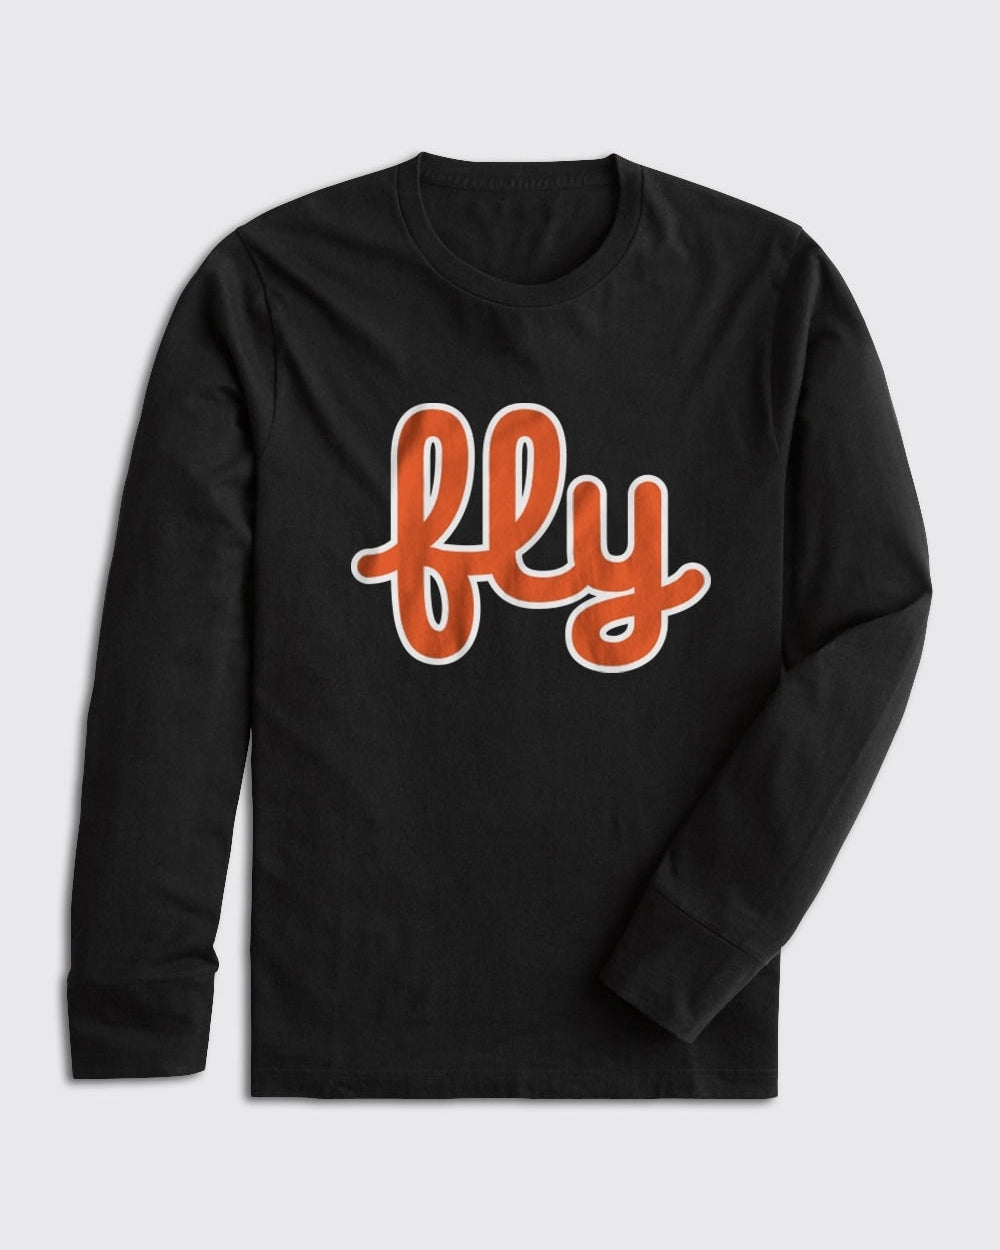 Philly Sports Shirts Flyers Fly Long Sleeve Athletic Heather / M